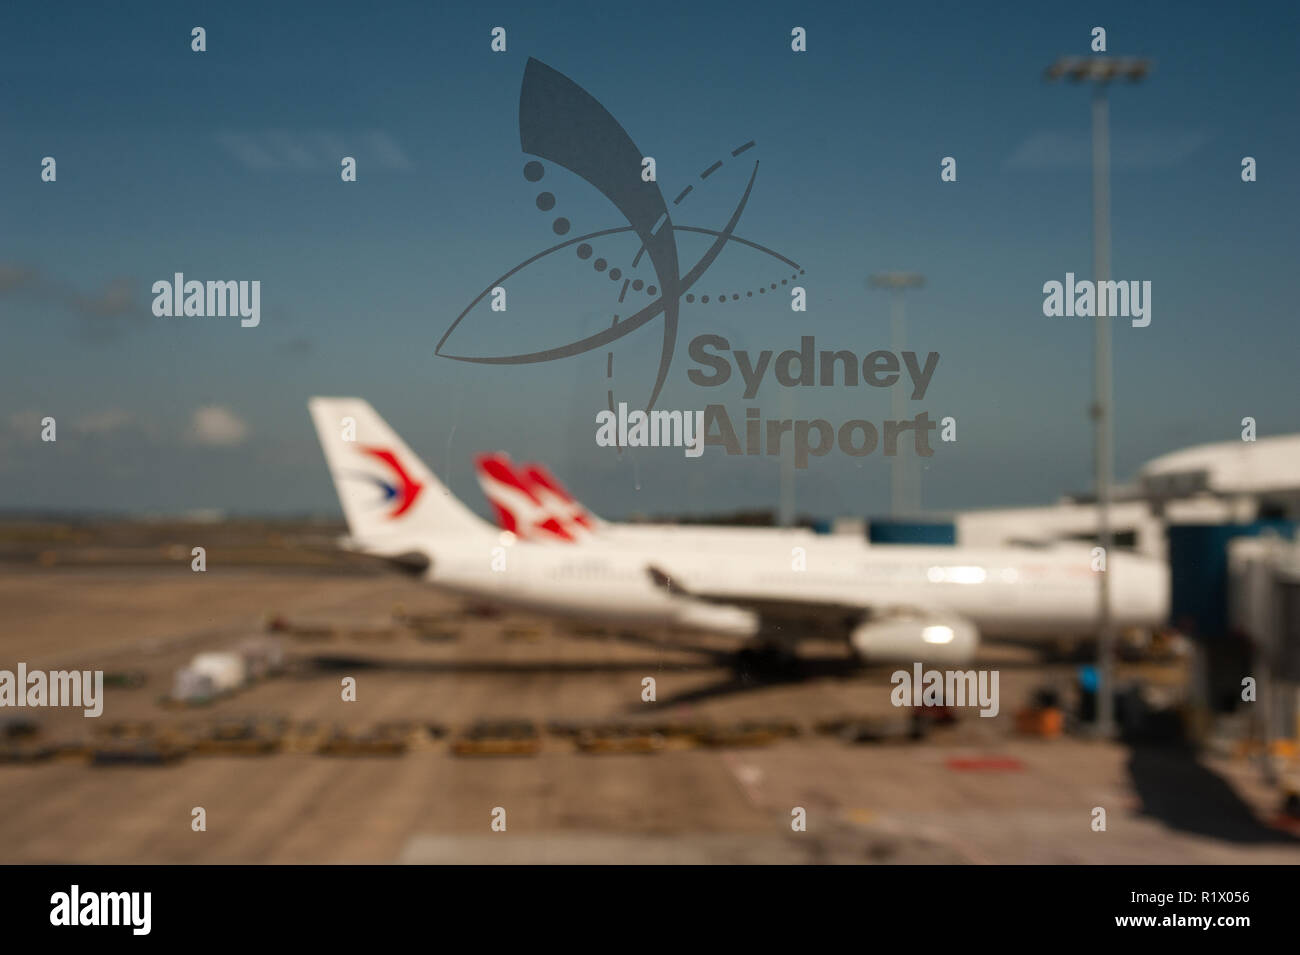 23.09.2018, Sydney, New South Wales, Australia - View through a window of docked aeroplanes at Sydney's International Airport Kingsford Smith. Stock Photo